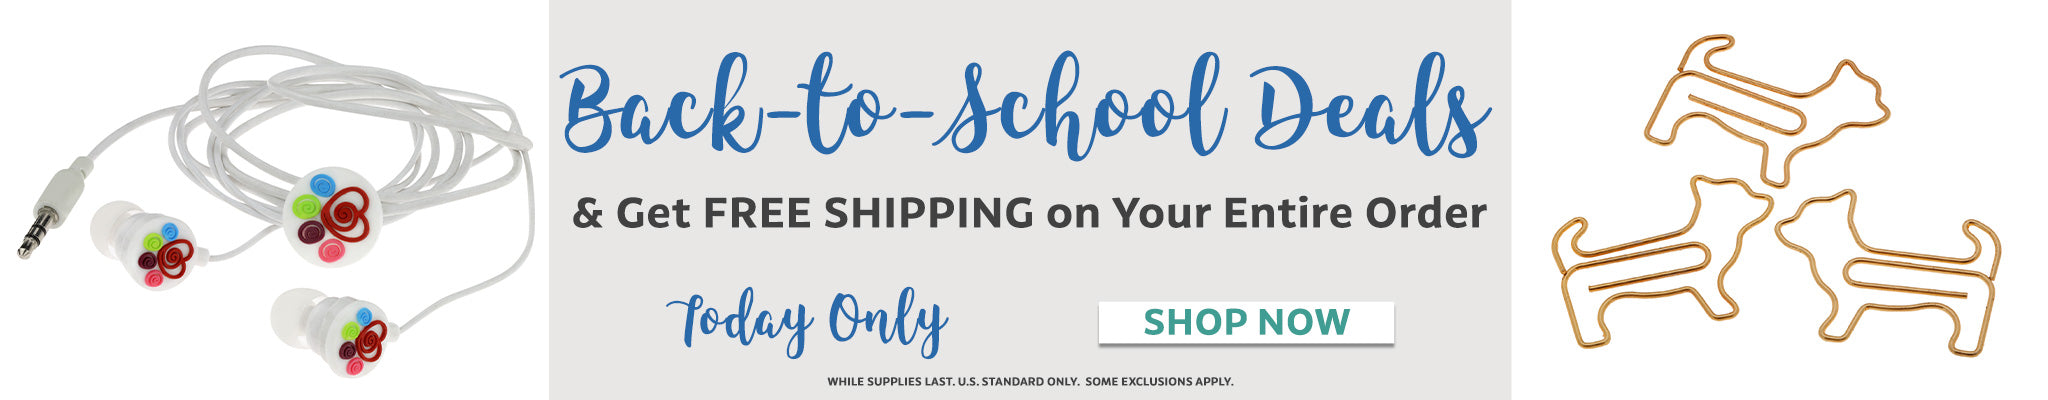 Back to School Retail Lightbox | Free Shipping on Your Entire Order with Purchase